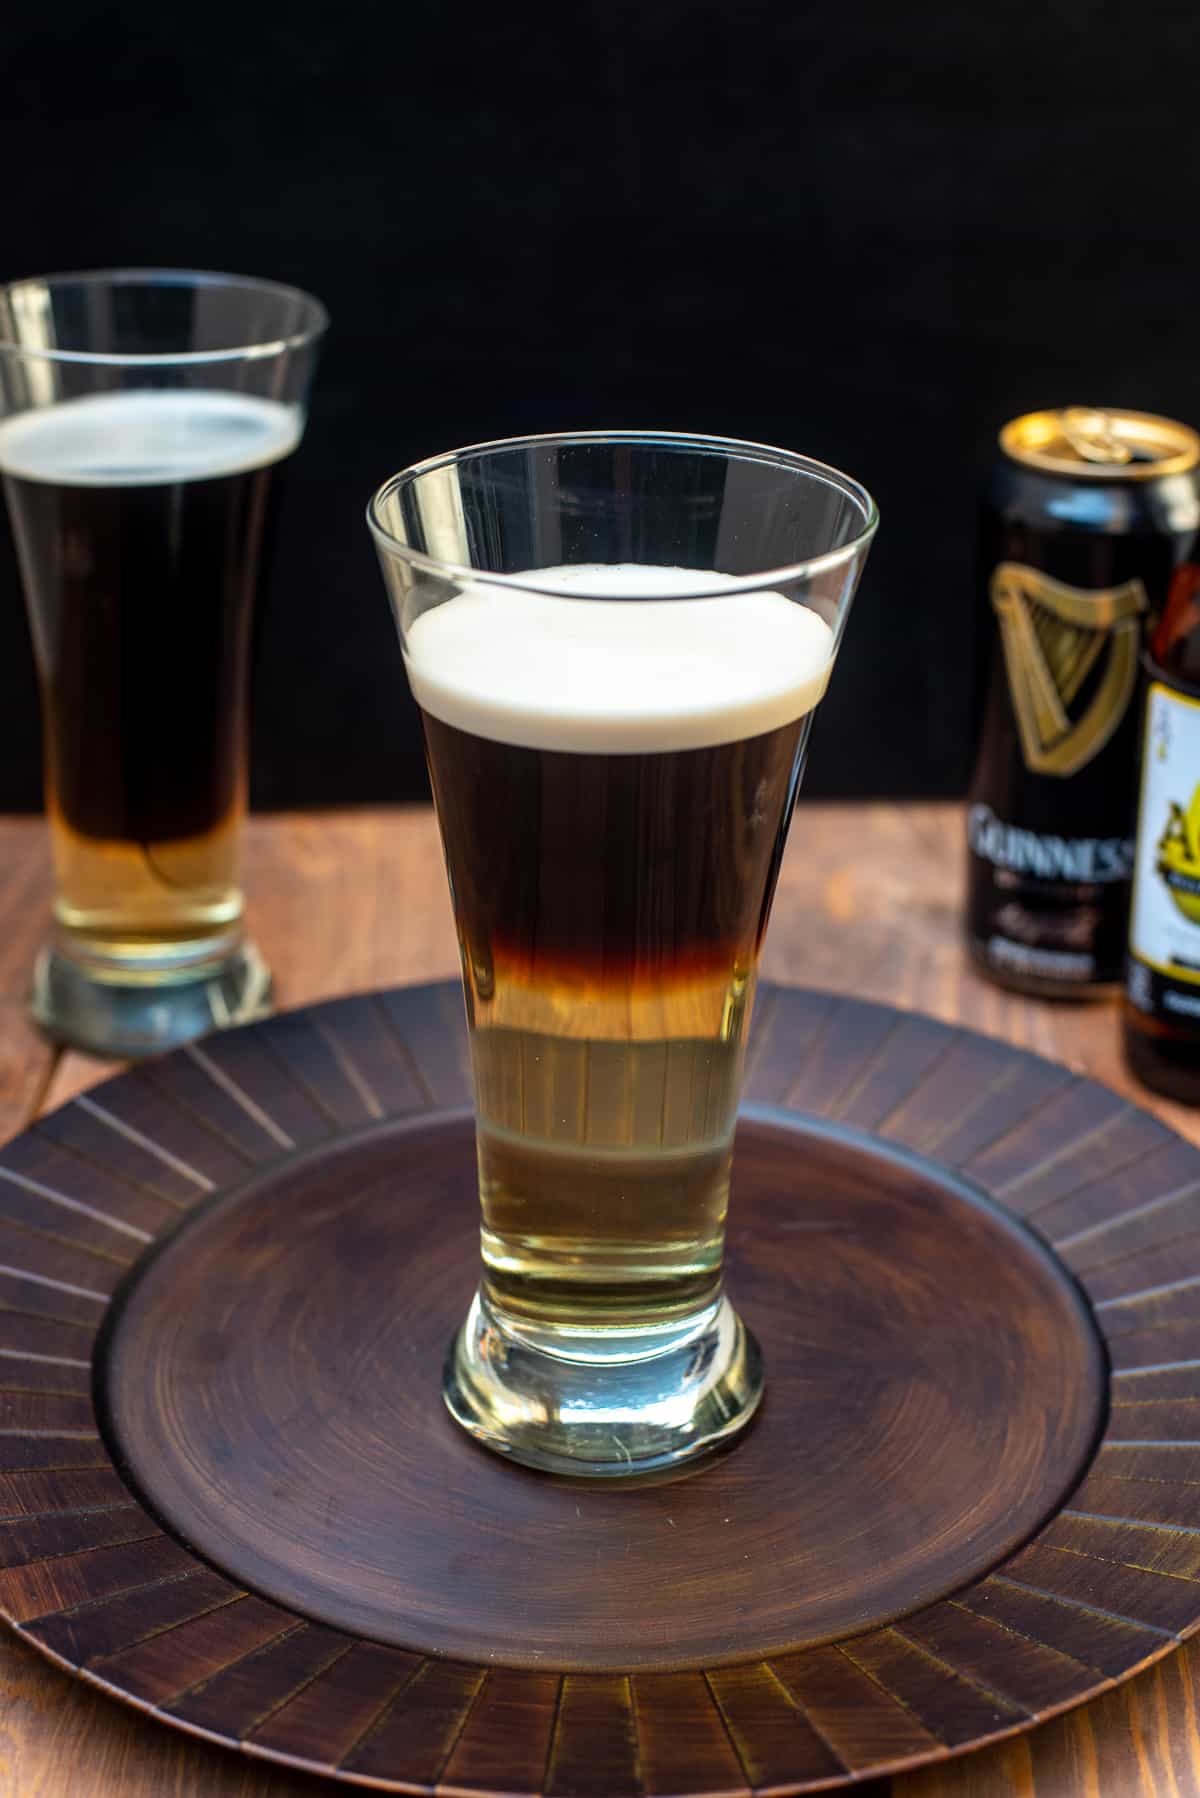 A Guinness and hard cider cocktail in a beer glass on a brown platter.